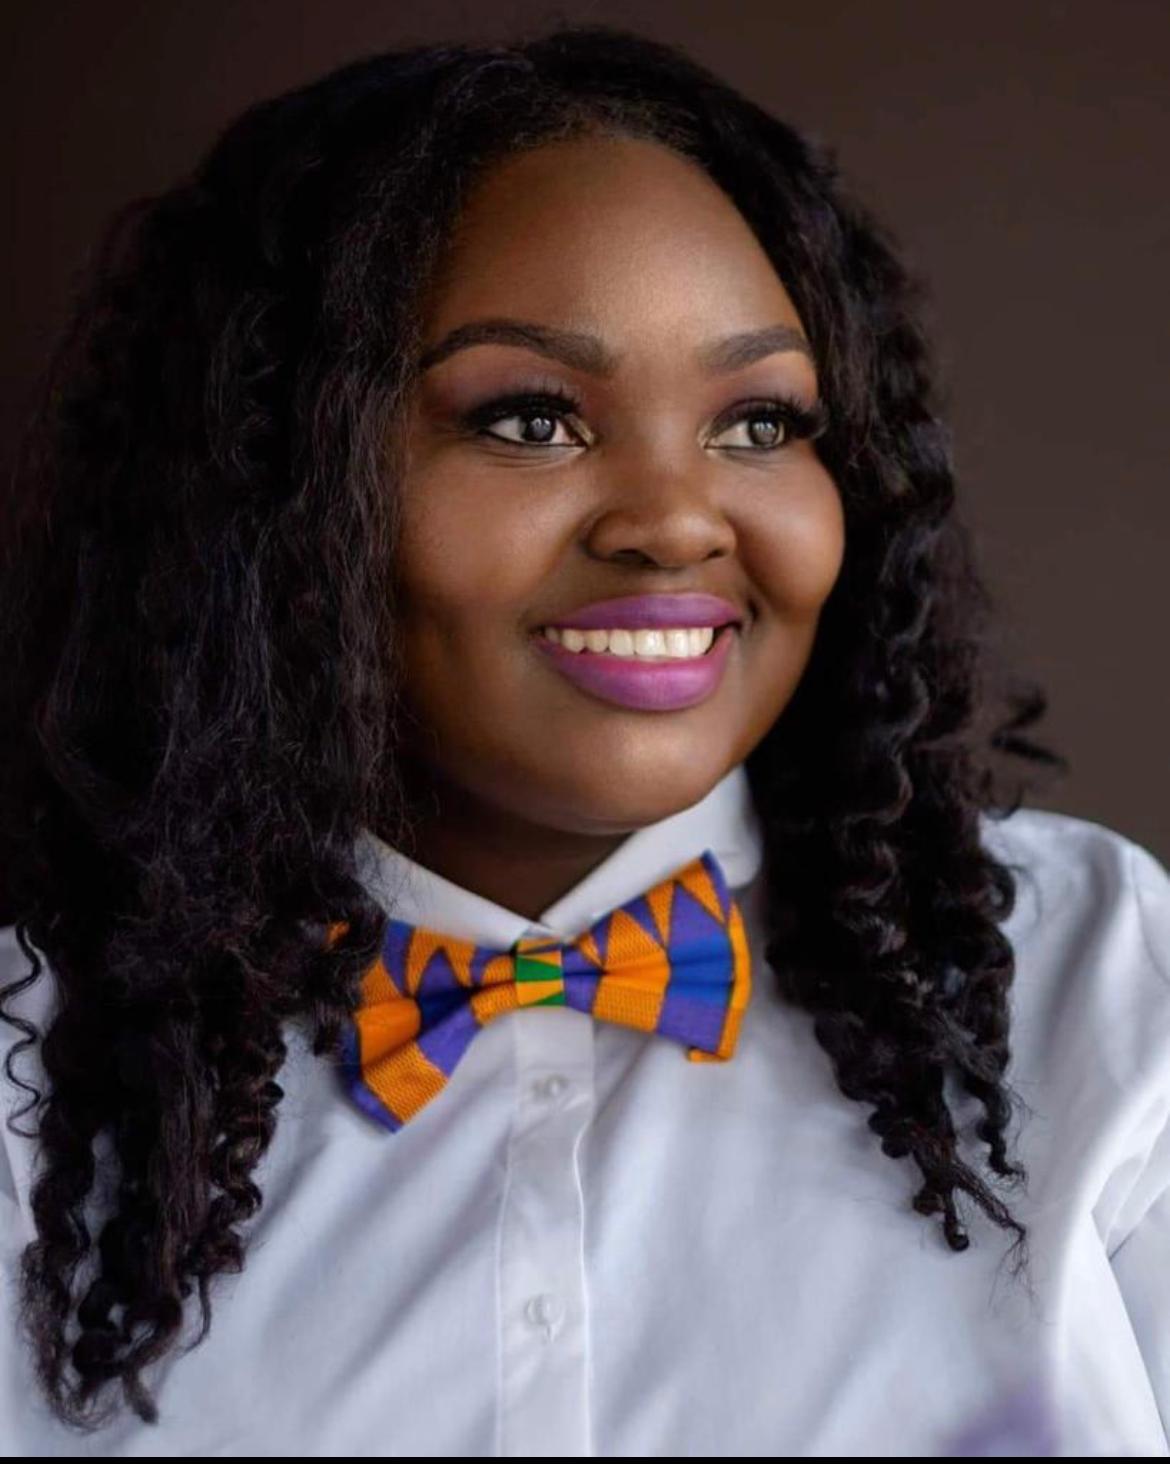 A woman with long hair wearing an orange bow tie.